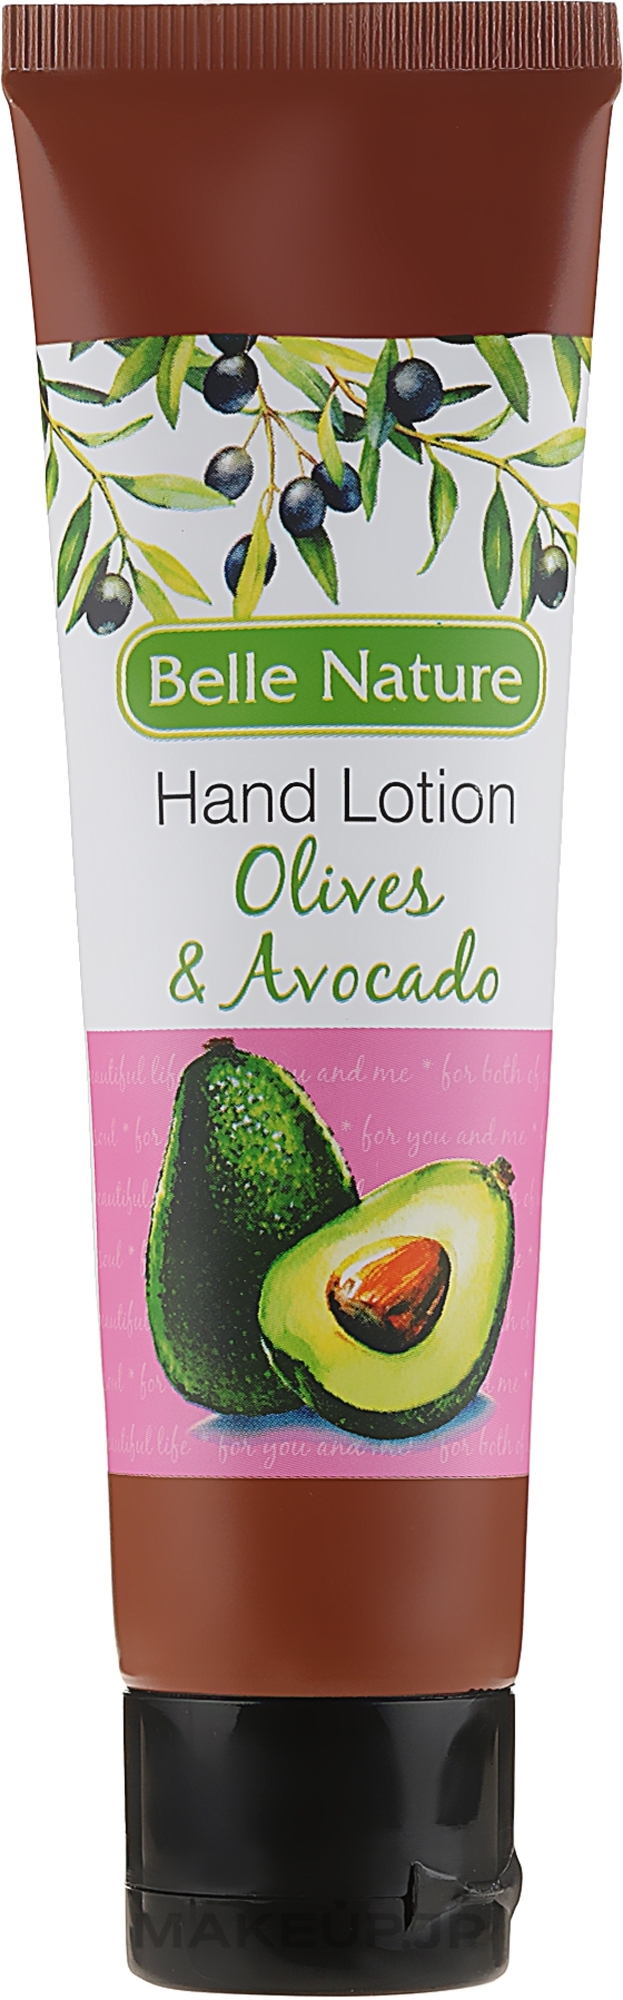 Hand Cream Balm with Olive & Avocado Scent - Belle Nature Hand Lotion Olives&Avocado — photo 60 ml